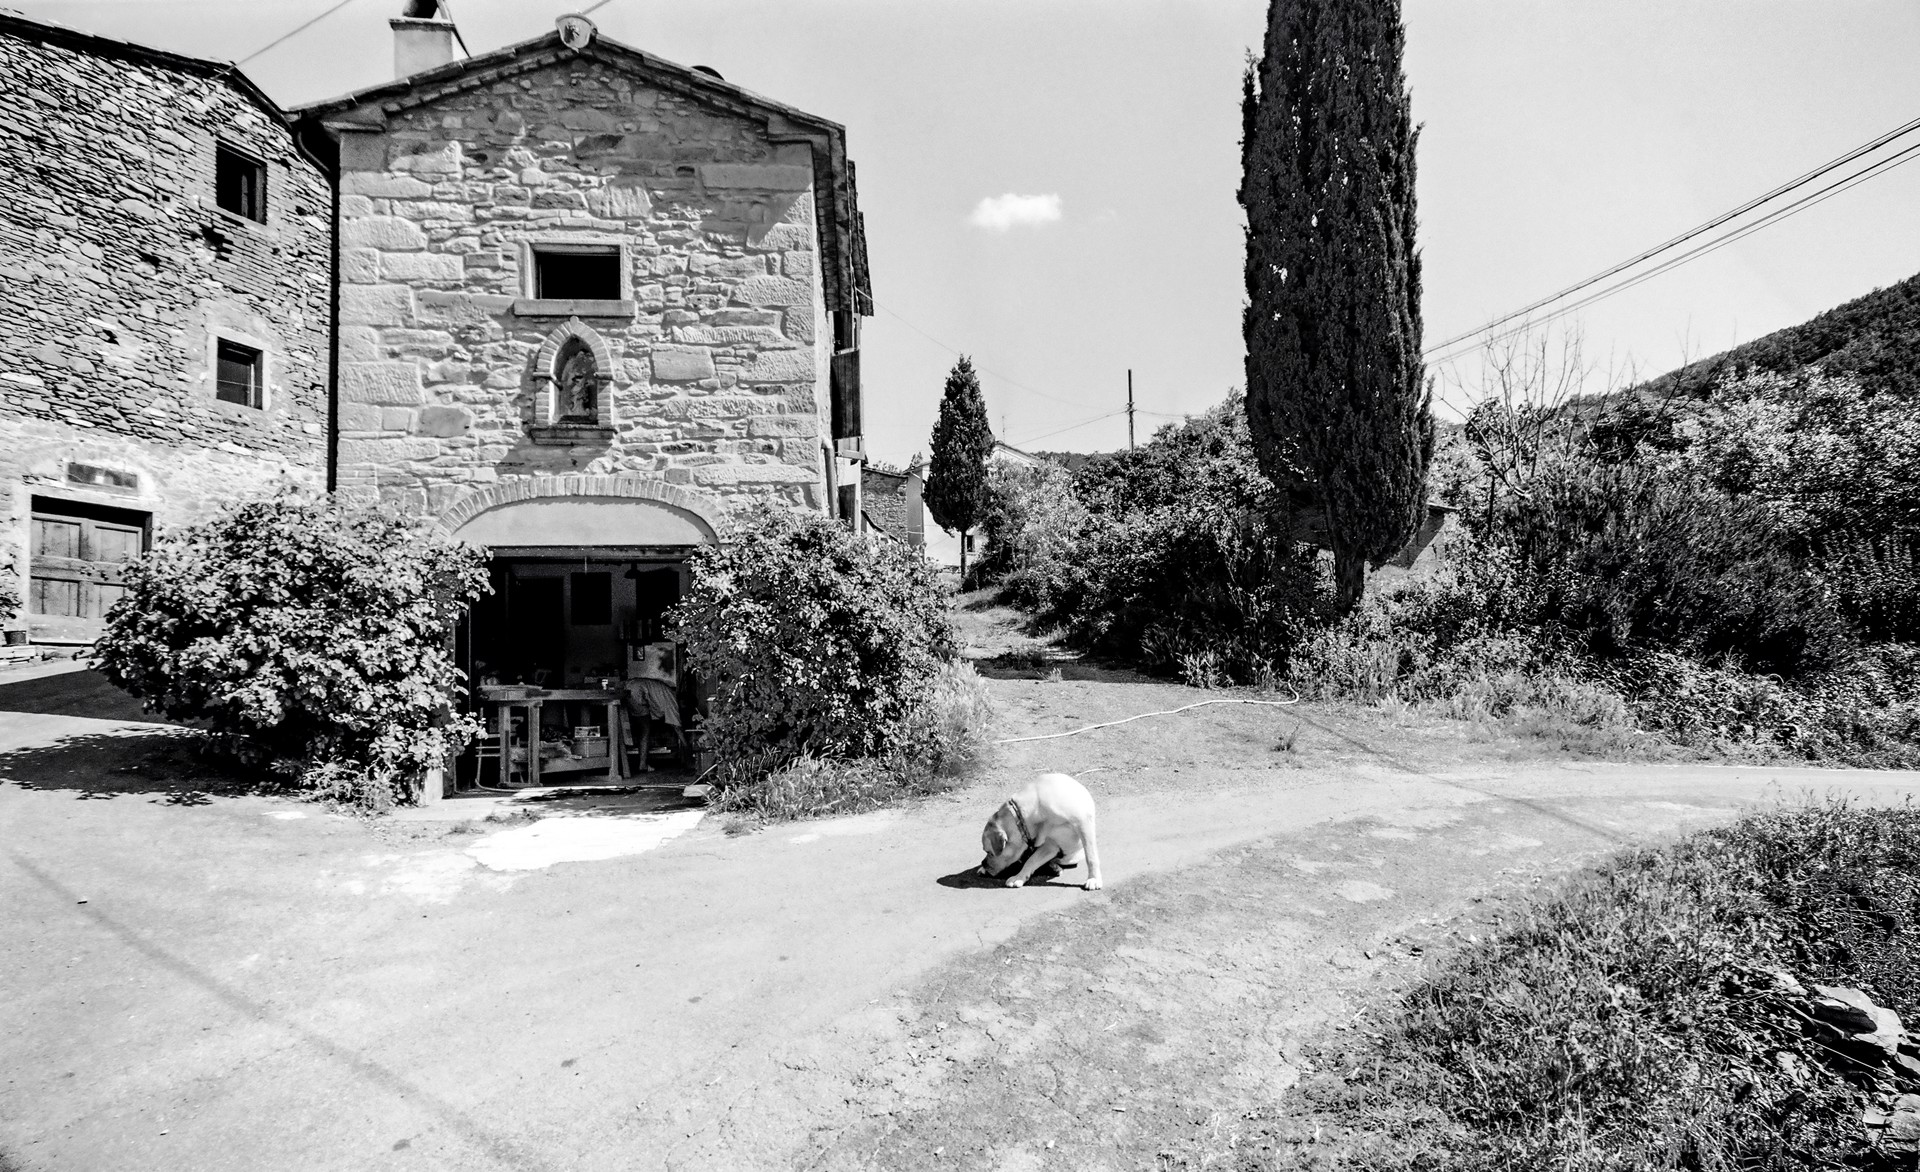 Trip With Giuseppe Alpini, Farmhouse With Dog, Castiglion Fiorentino, Italy by Lawrence McFarland